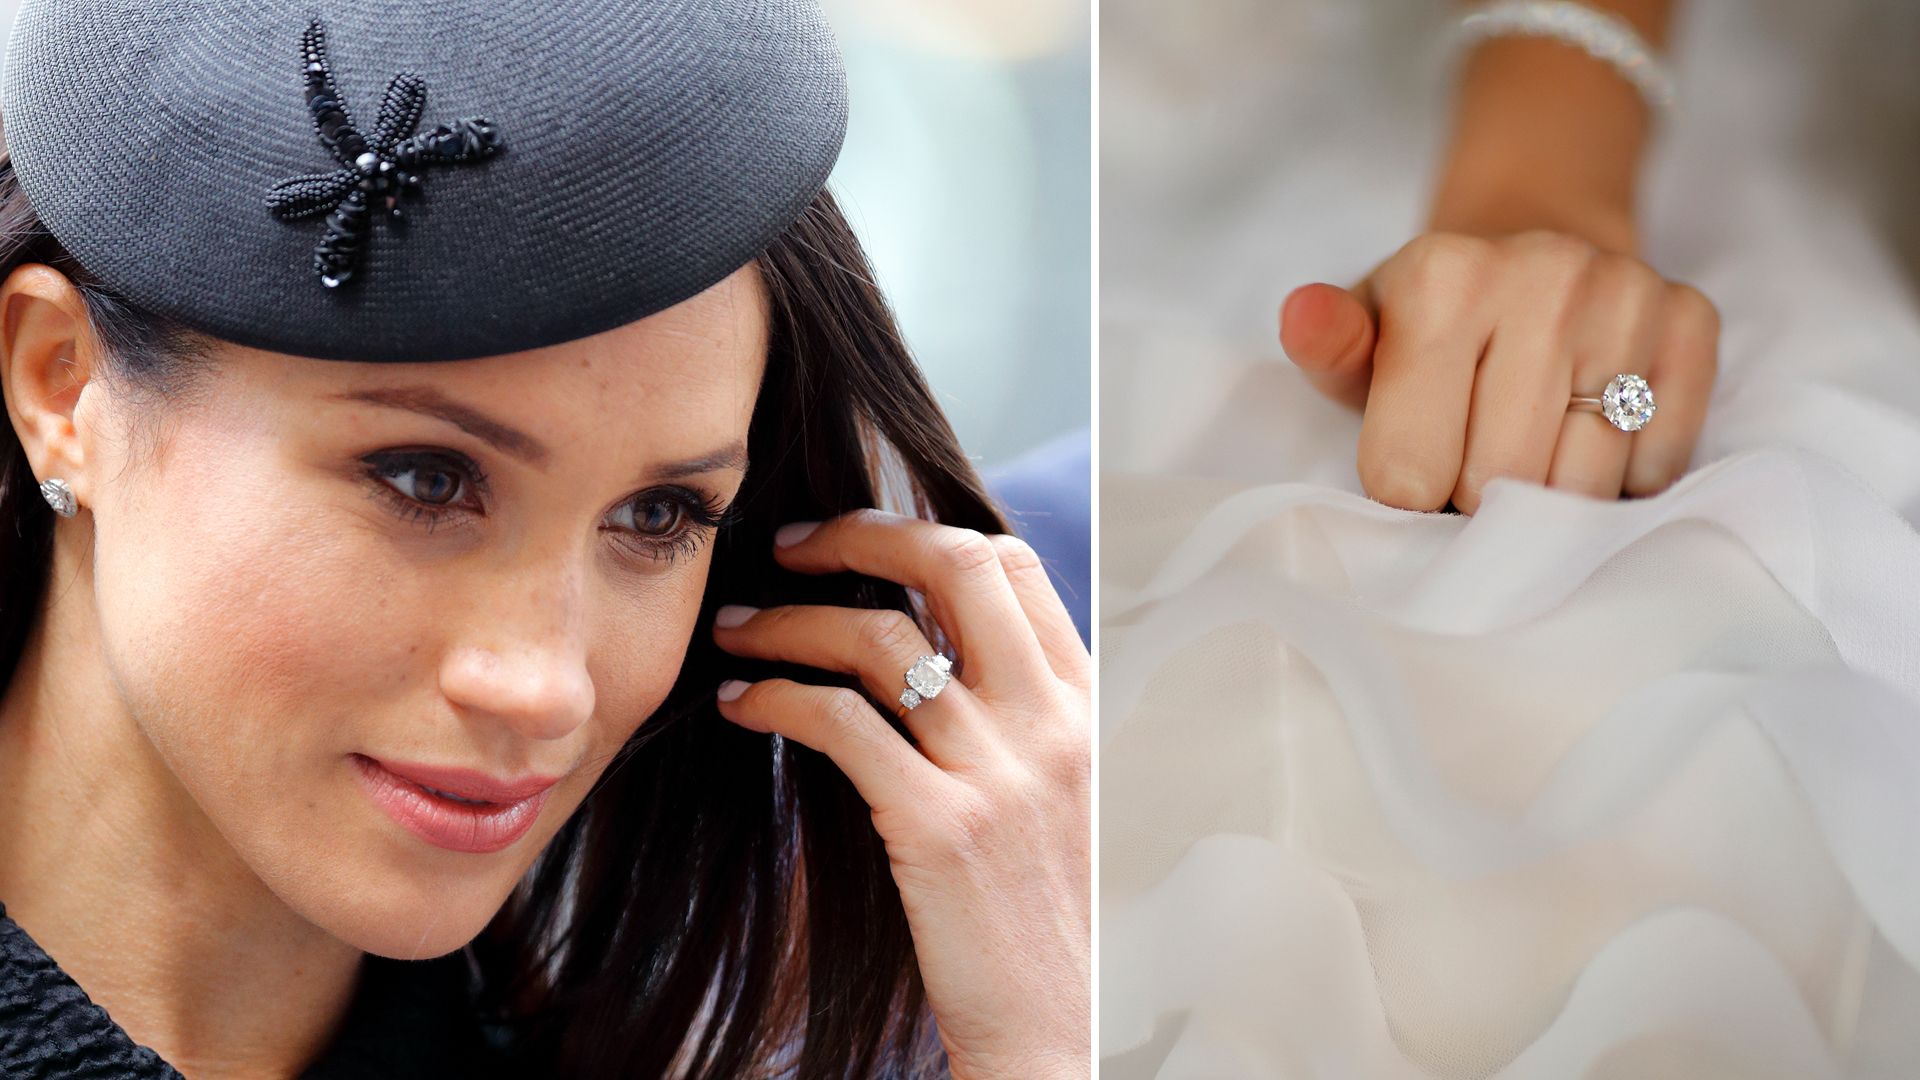 Kate Middleton Reveals She and Princess Diana Share the Same Ring Size  While Talking About Engagement Ring